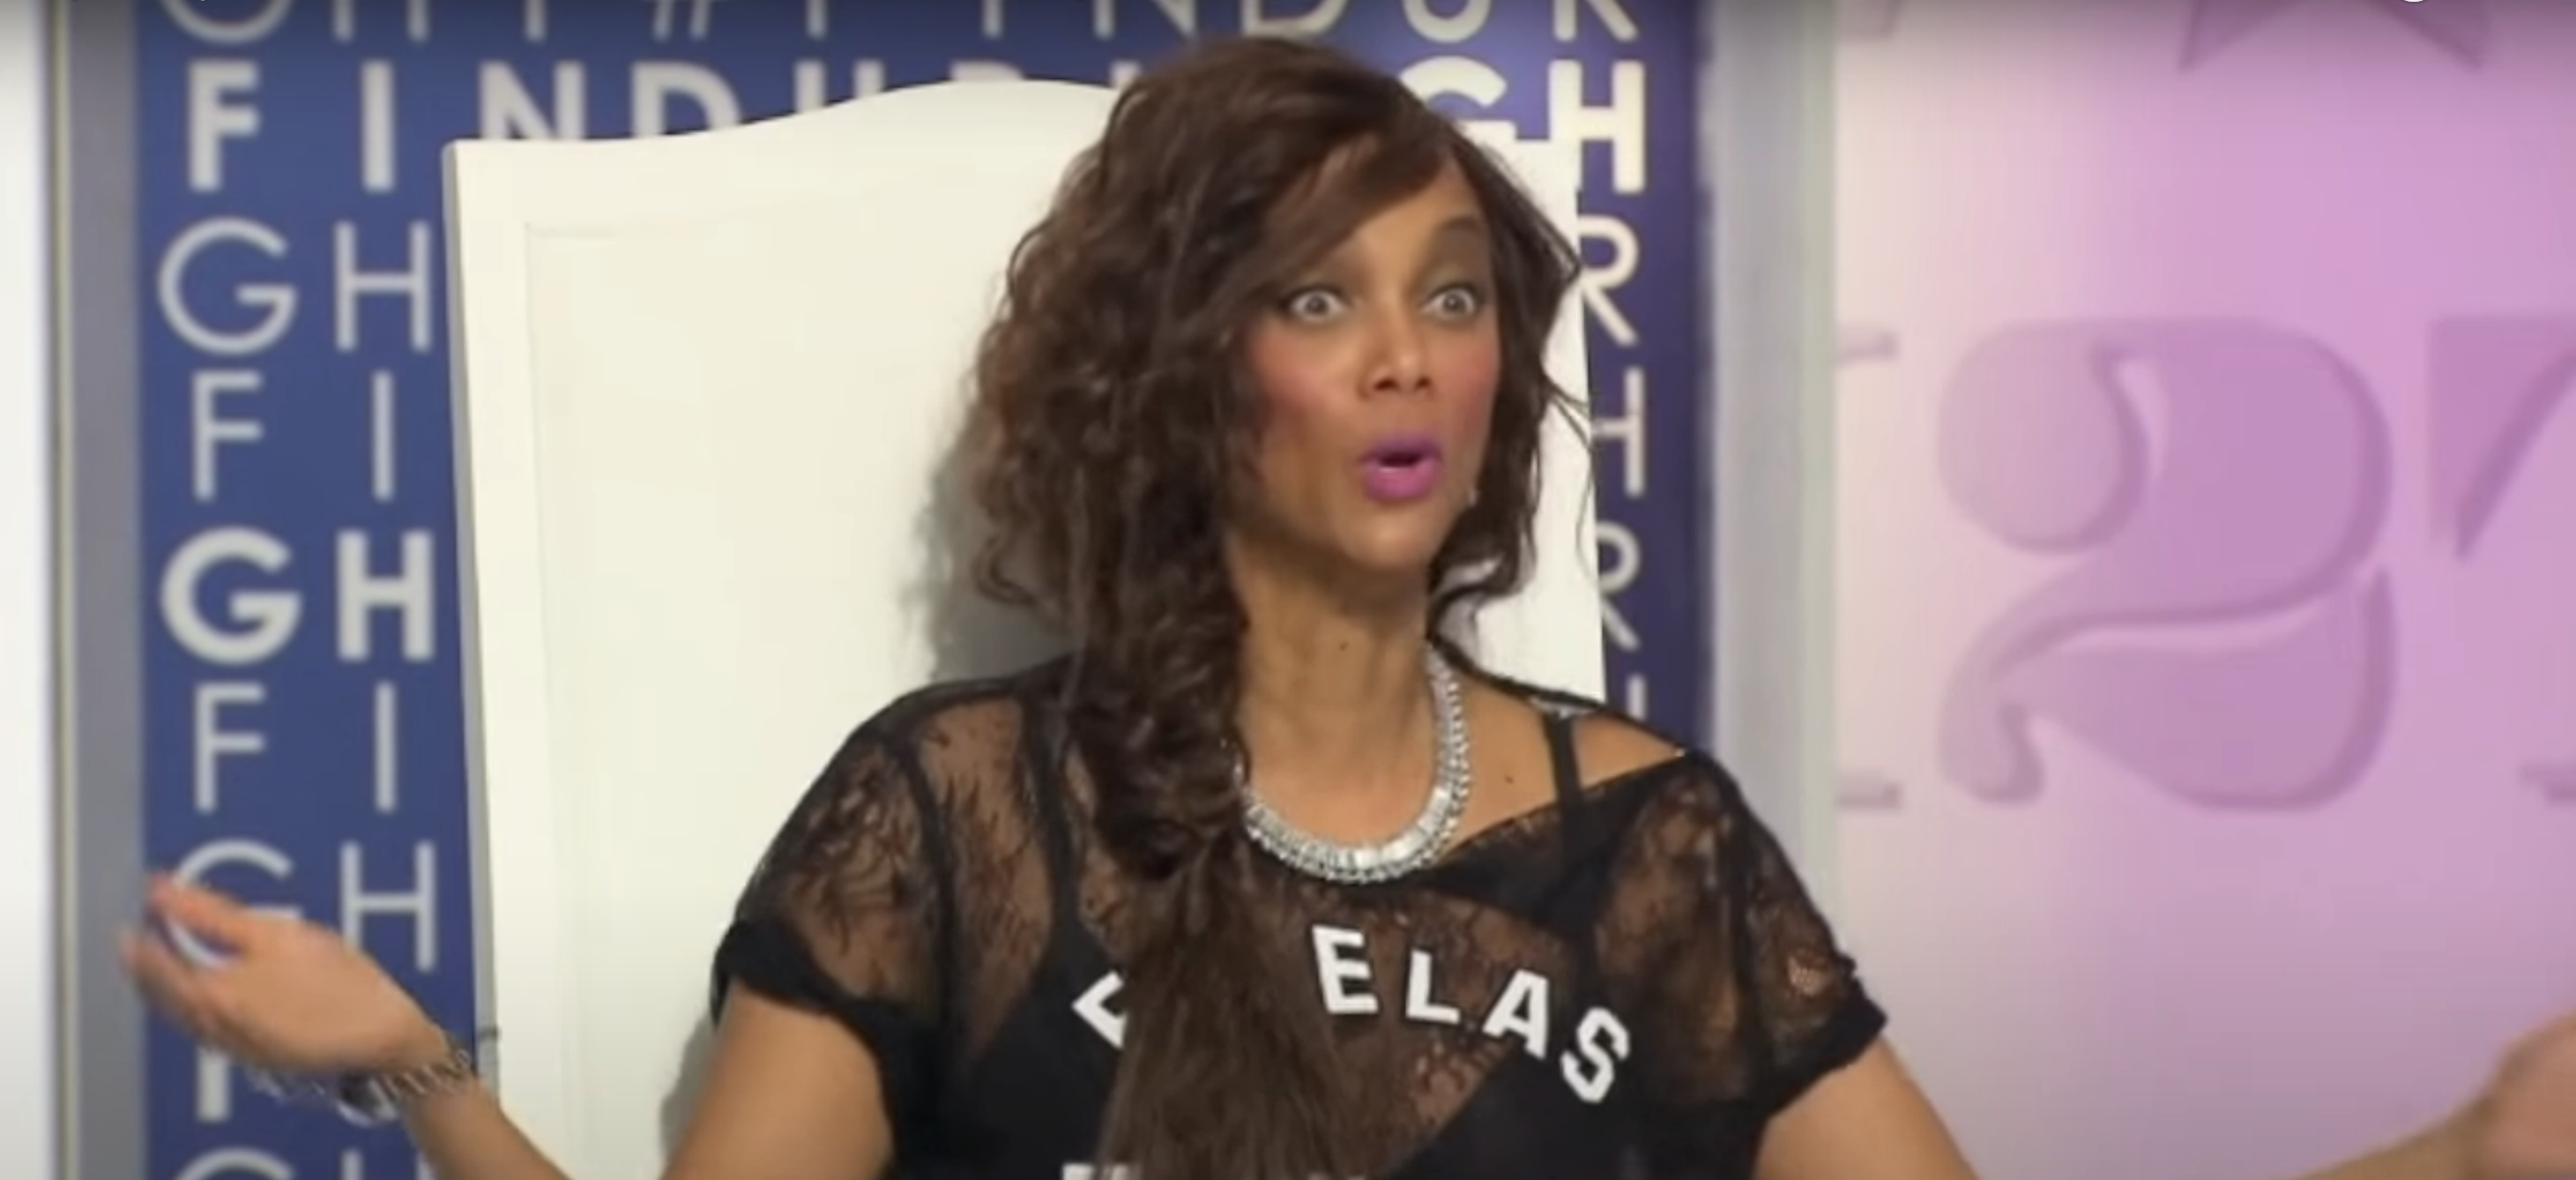 Tyra with a shocked, what face